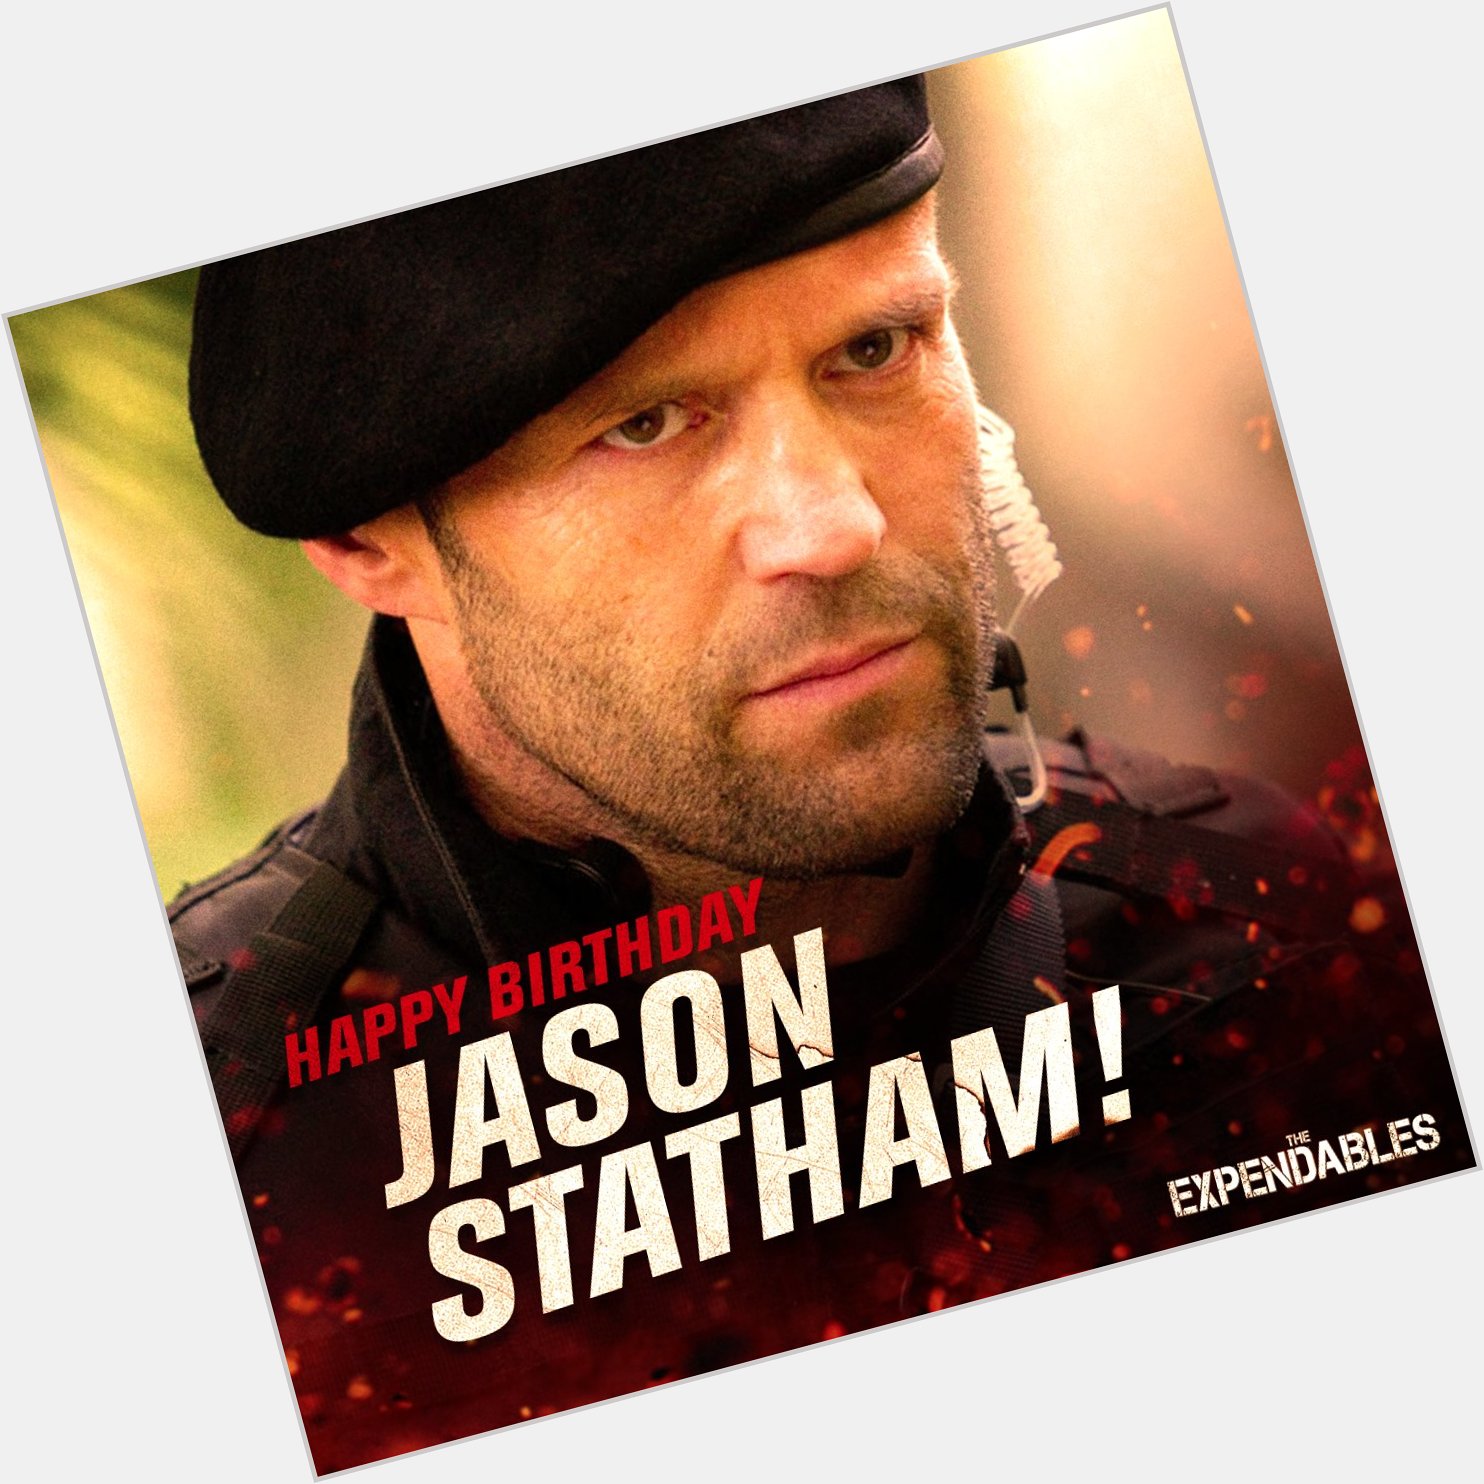 Join us in wishing Jason Statham a very happy birthday! 